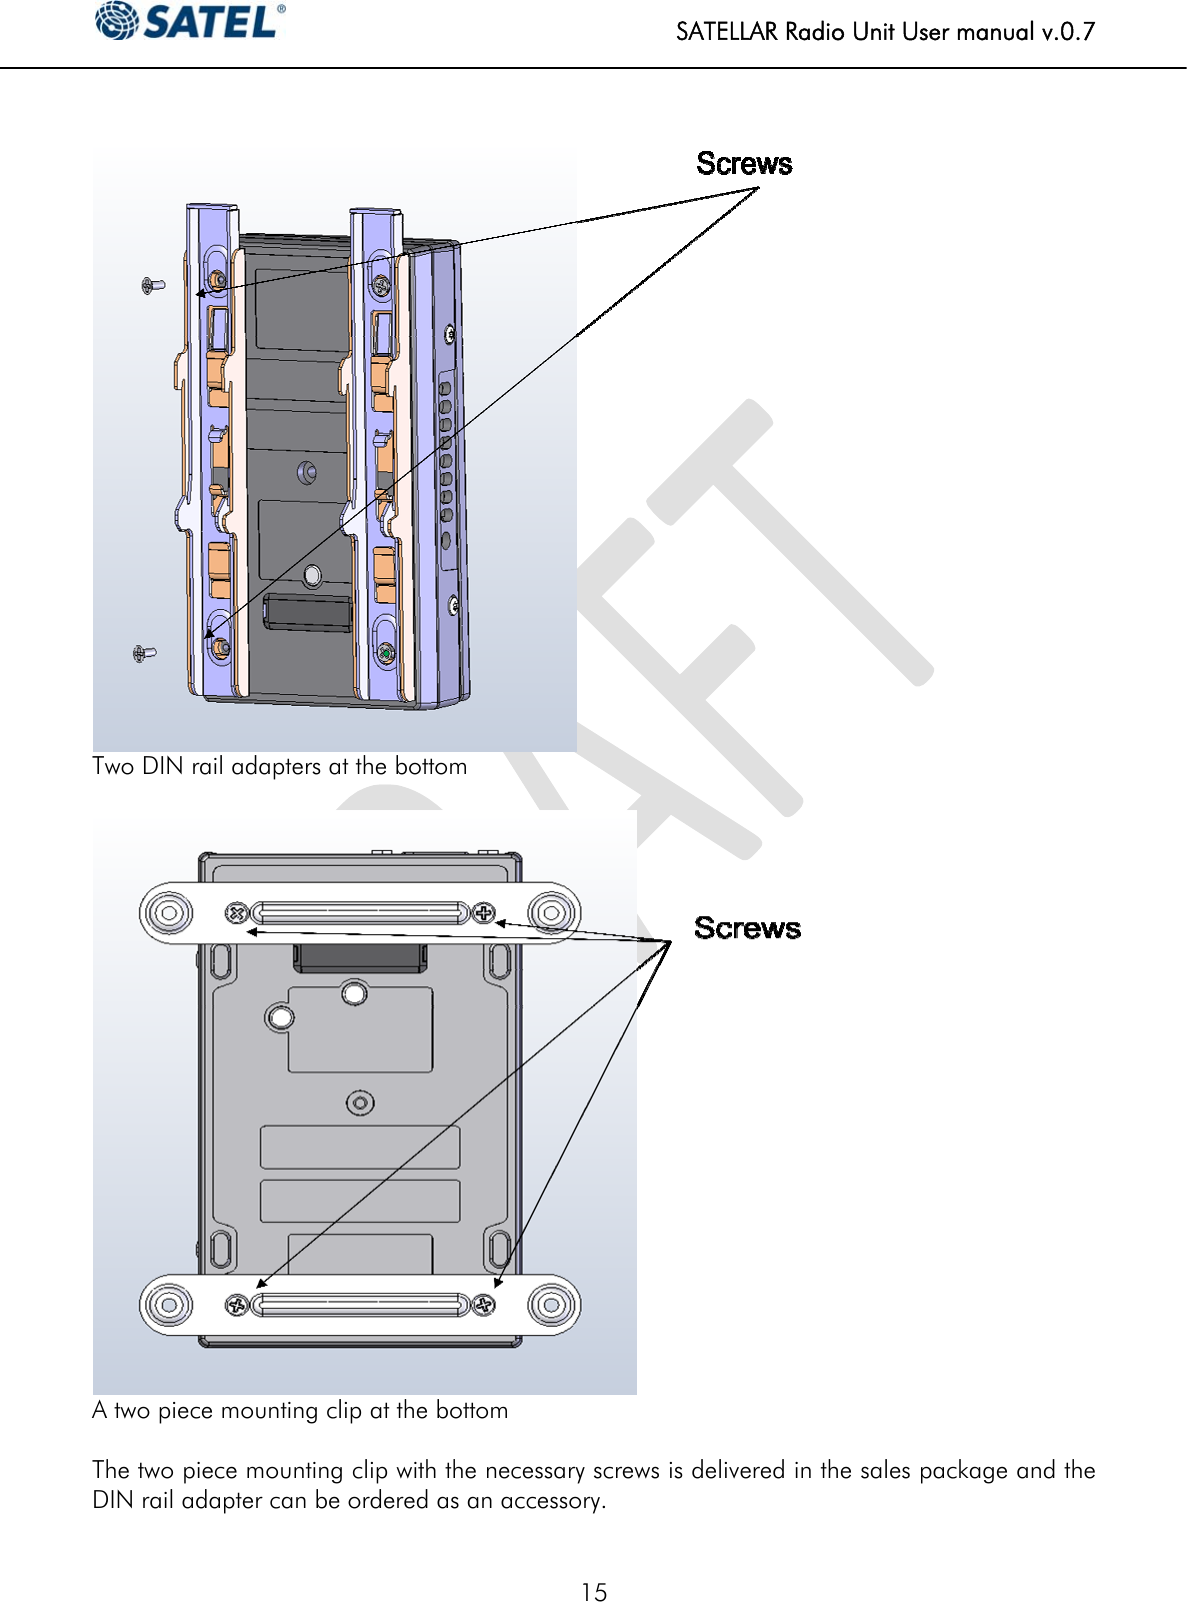   SATELLAR Radio Unit User manual v.0.7  15    Two DIN rail adapters at the bottom   A two piece mounting clip at the bottom  The two piece mounting clip with the necessary screws is delivered in the sales package and the DIN rail adapter can be ordered as an accessory. 